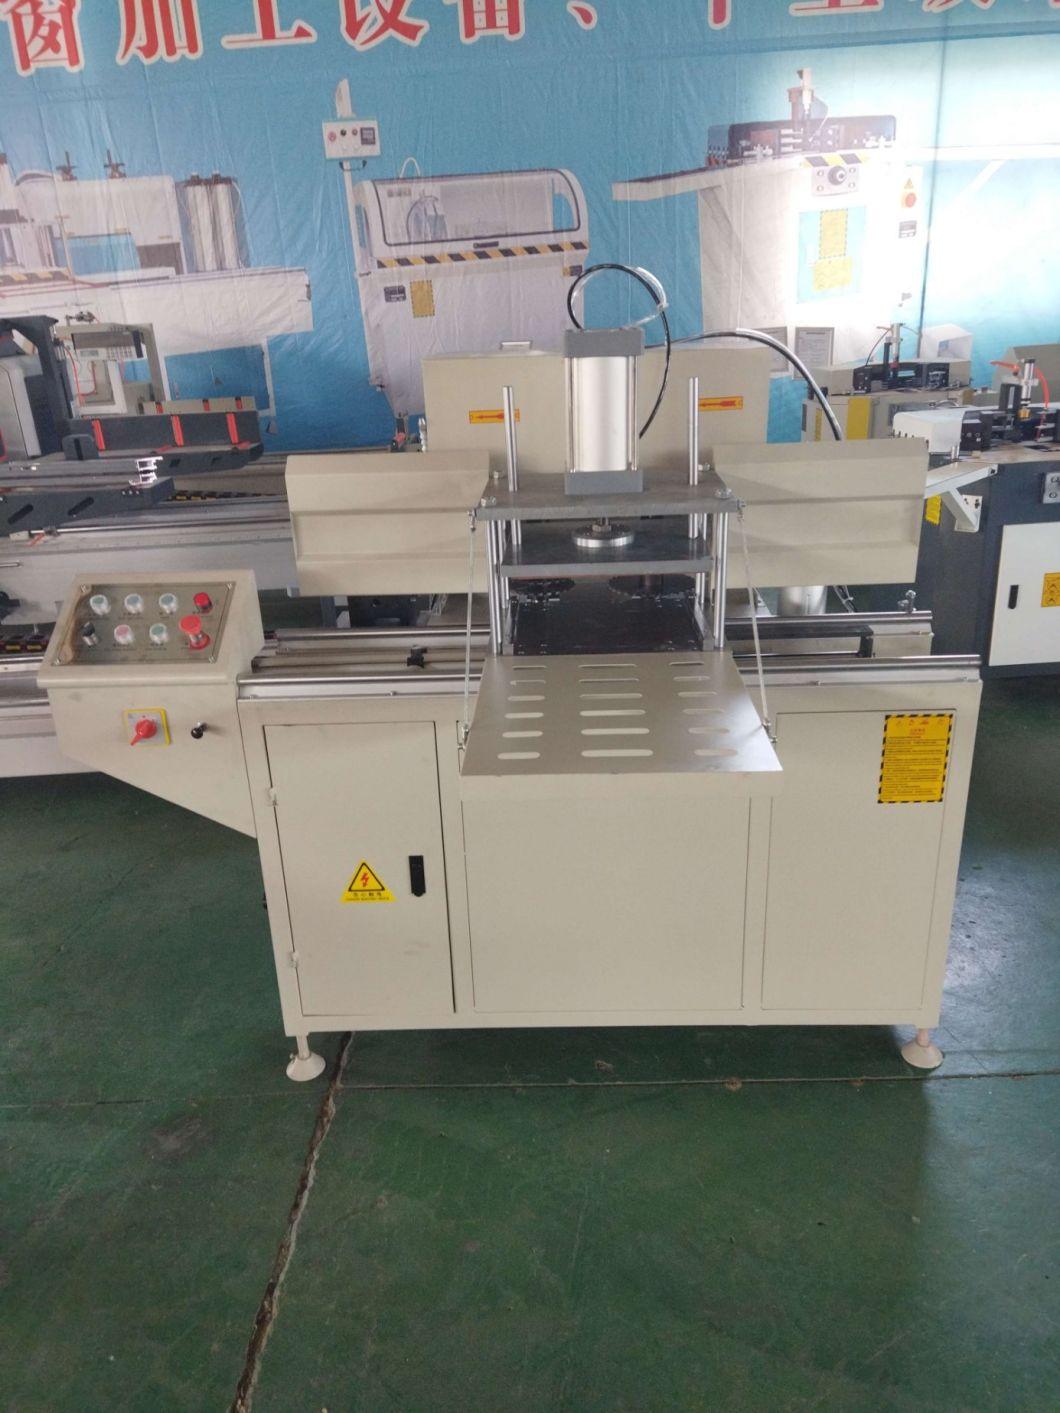 Lxd-200X4 Endface Multiple Profiles Milling Machine for Rectangular Grooves CNC Machine for Doors and Windows Making CNC Cutter